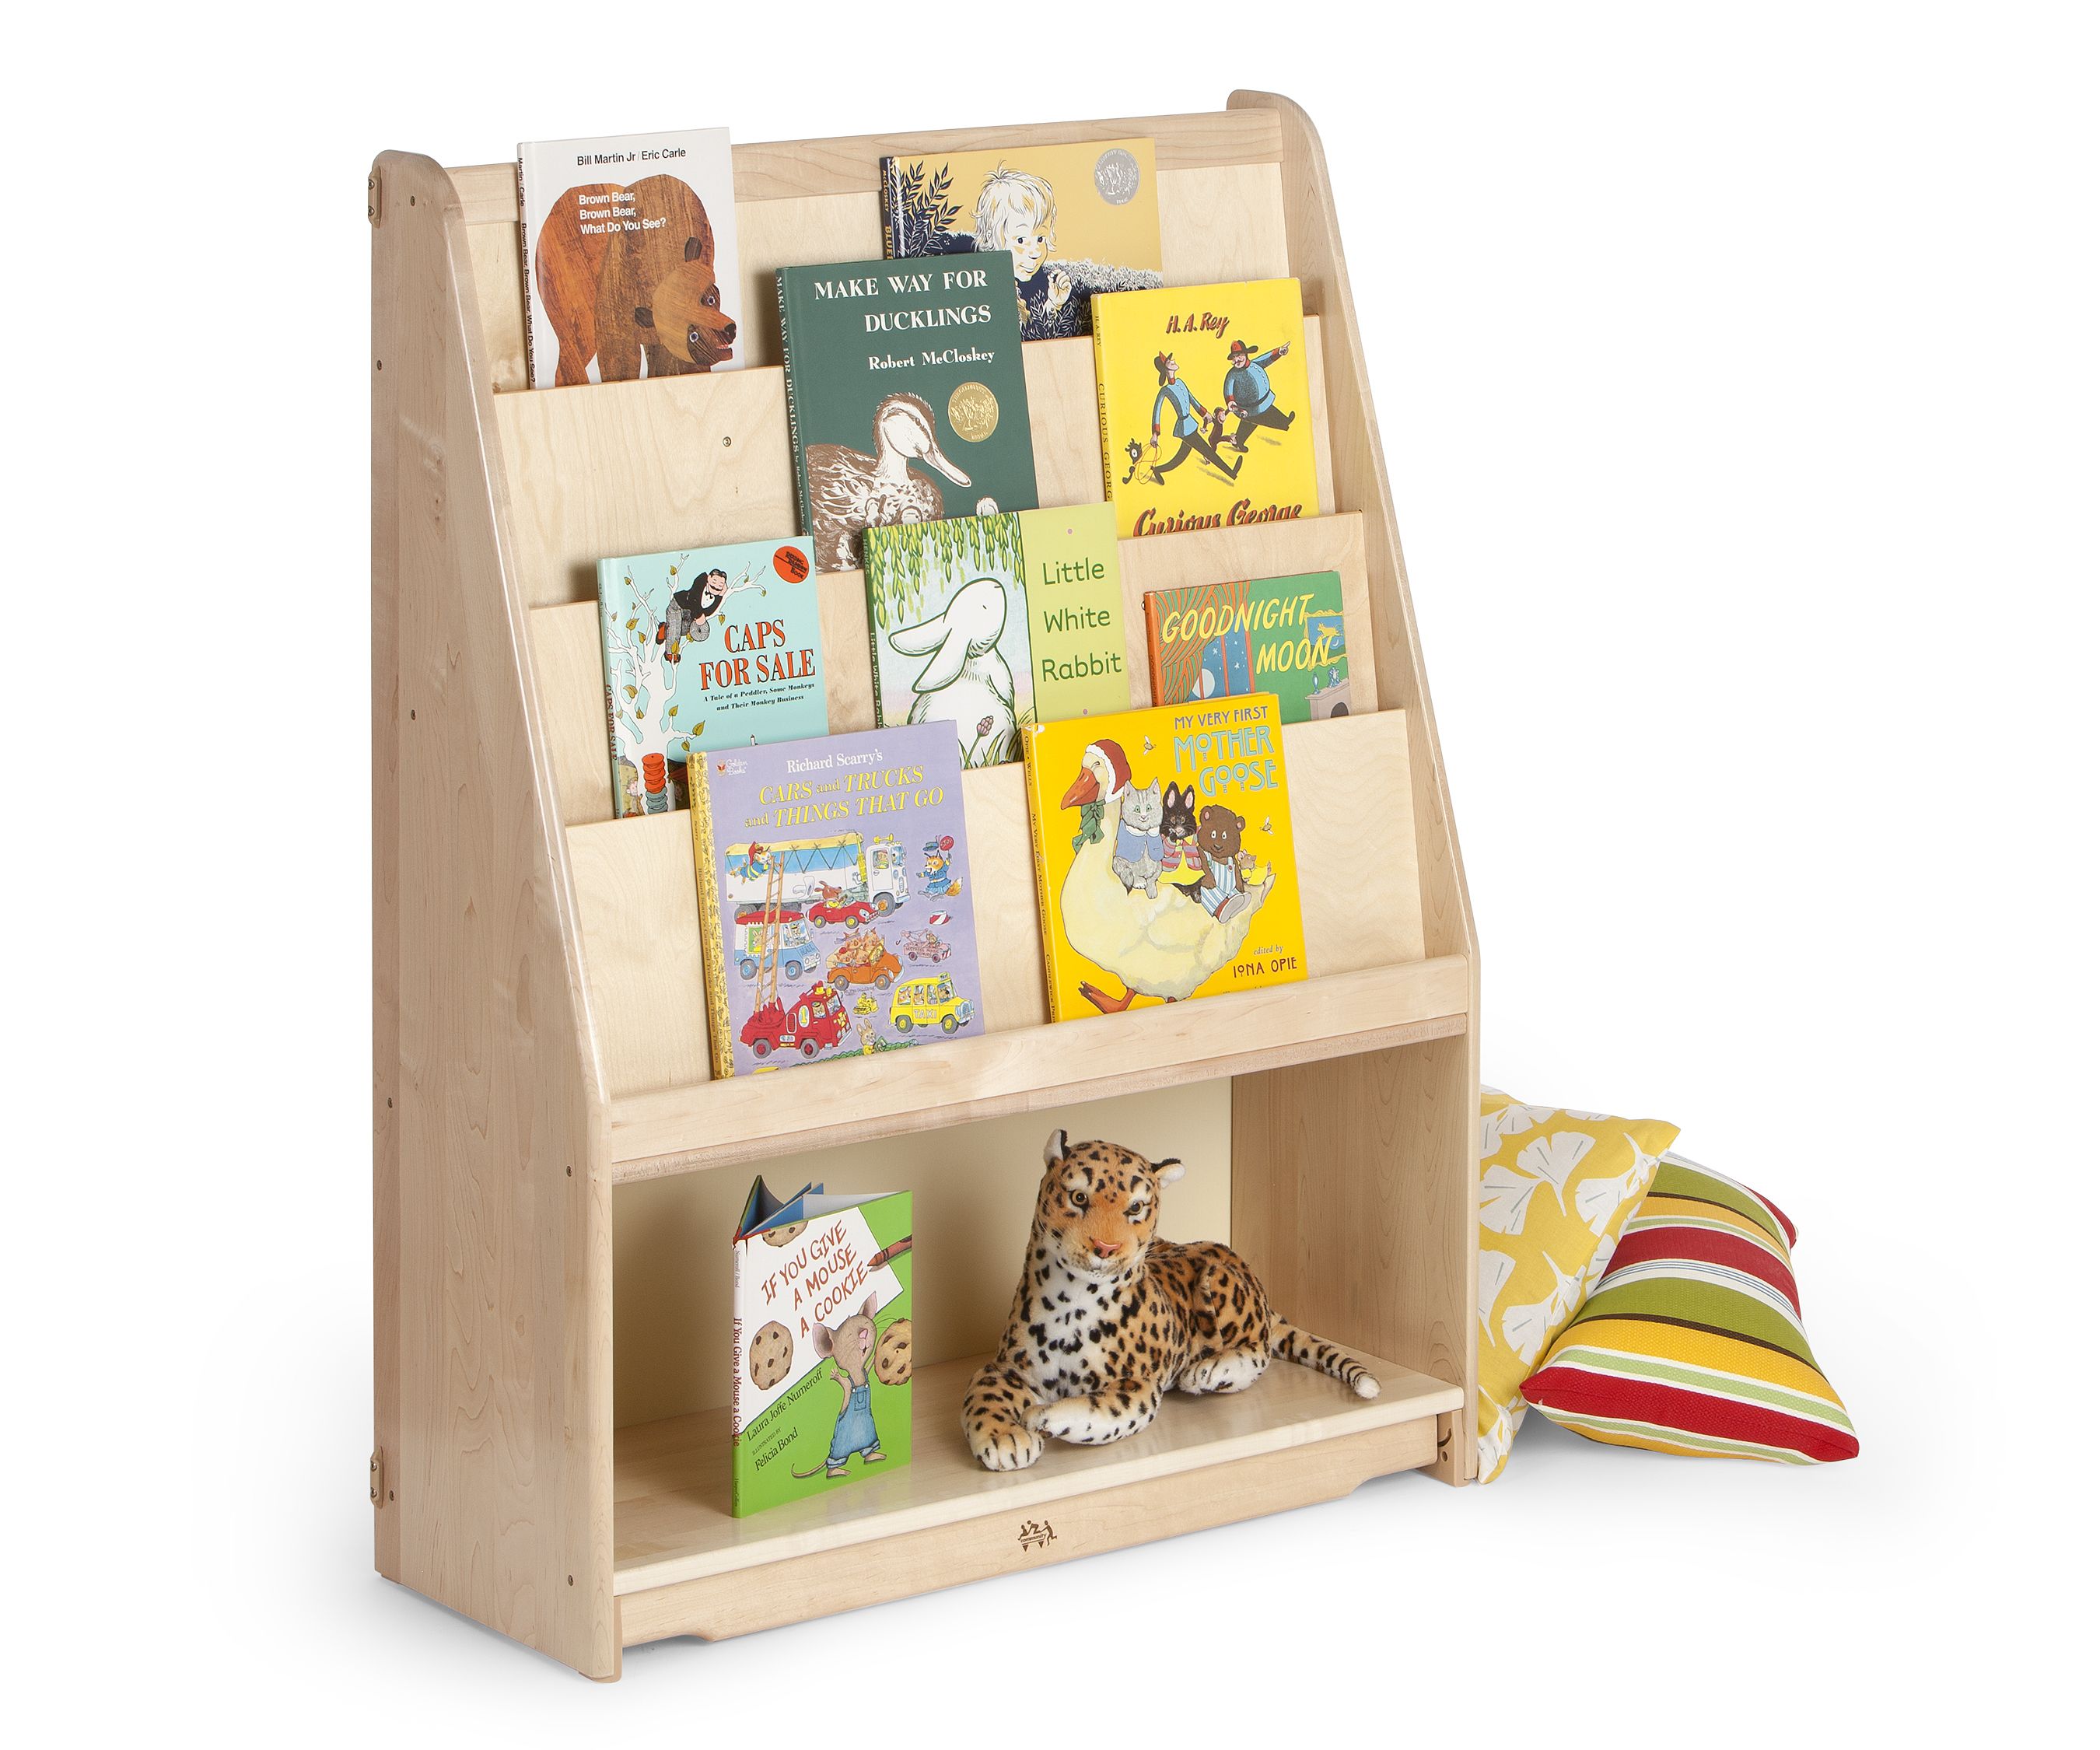 https://www.communityplaythings.com/-/media/images/product-images/classroom/shelving/product-images/f776-library-shelf/f776-in-use.ashx?rev=c035f3f6c7f548dea160318fd5bb0065&hash=4F38891BA0629CEC70BA4DC5E0FEEA9A